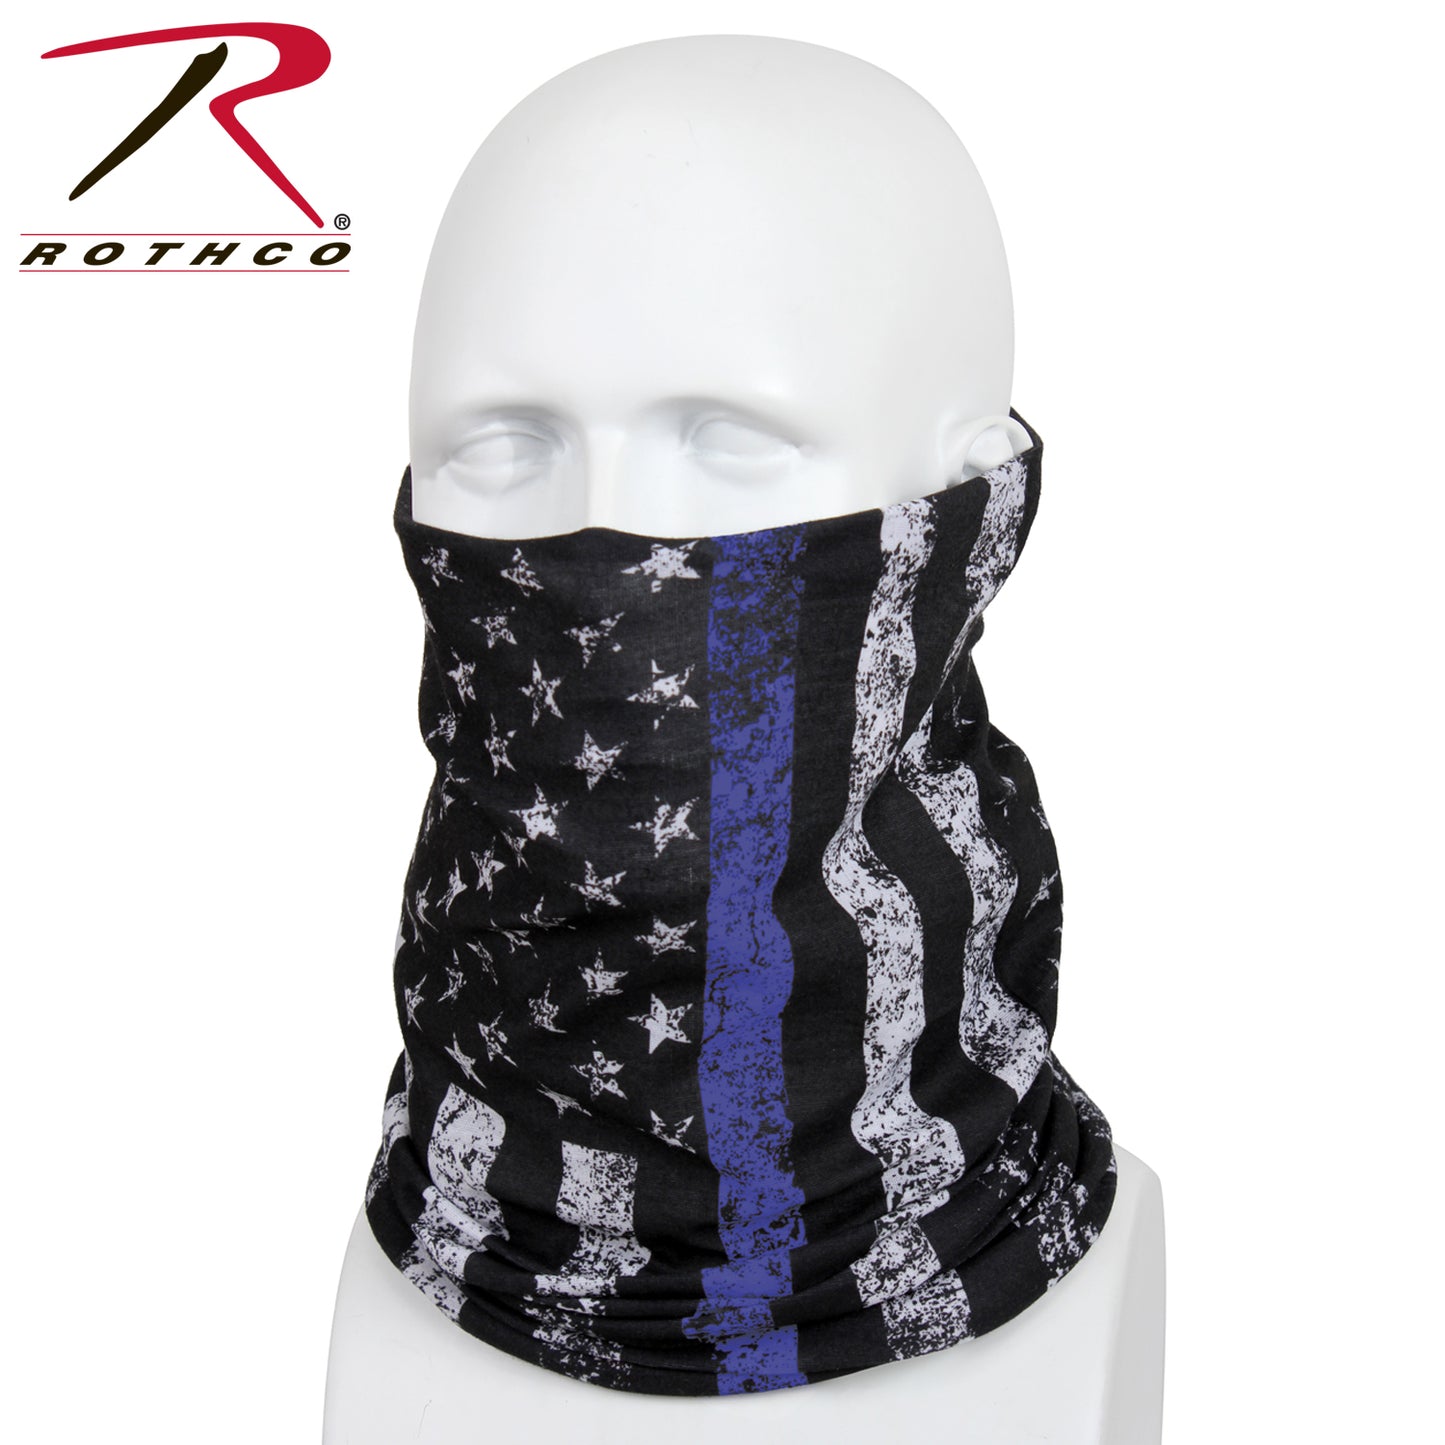 Rothco Thin Blue Line Multi-Use Tactical Wrap